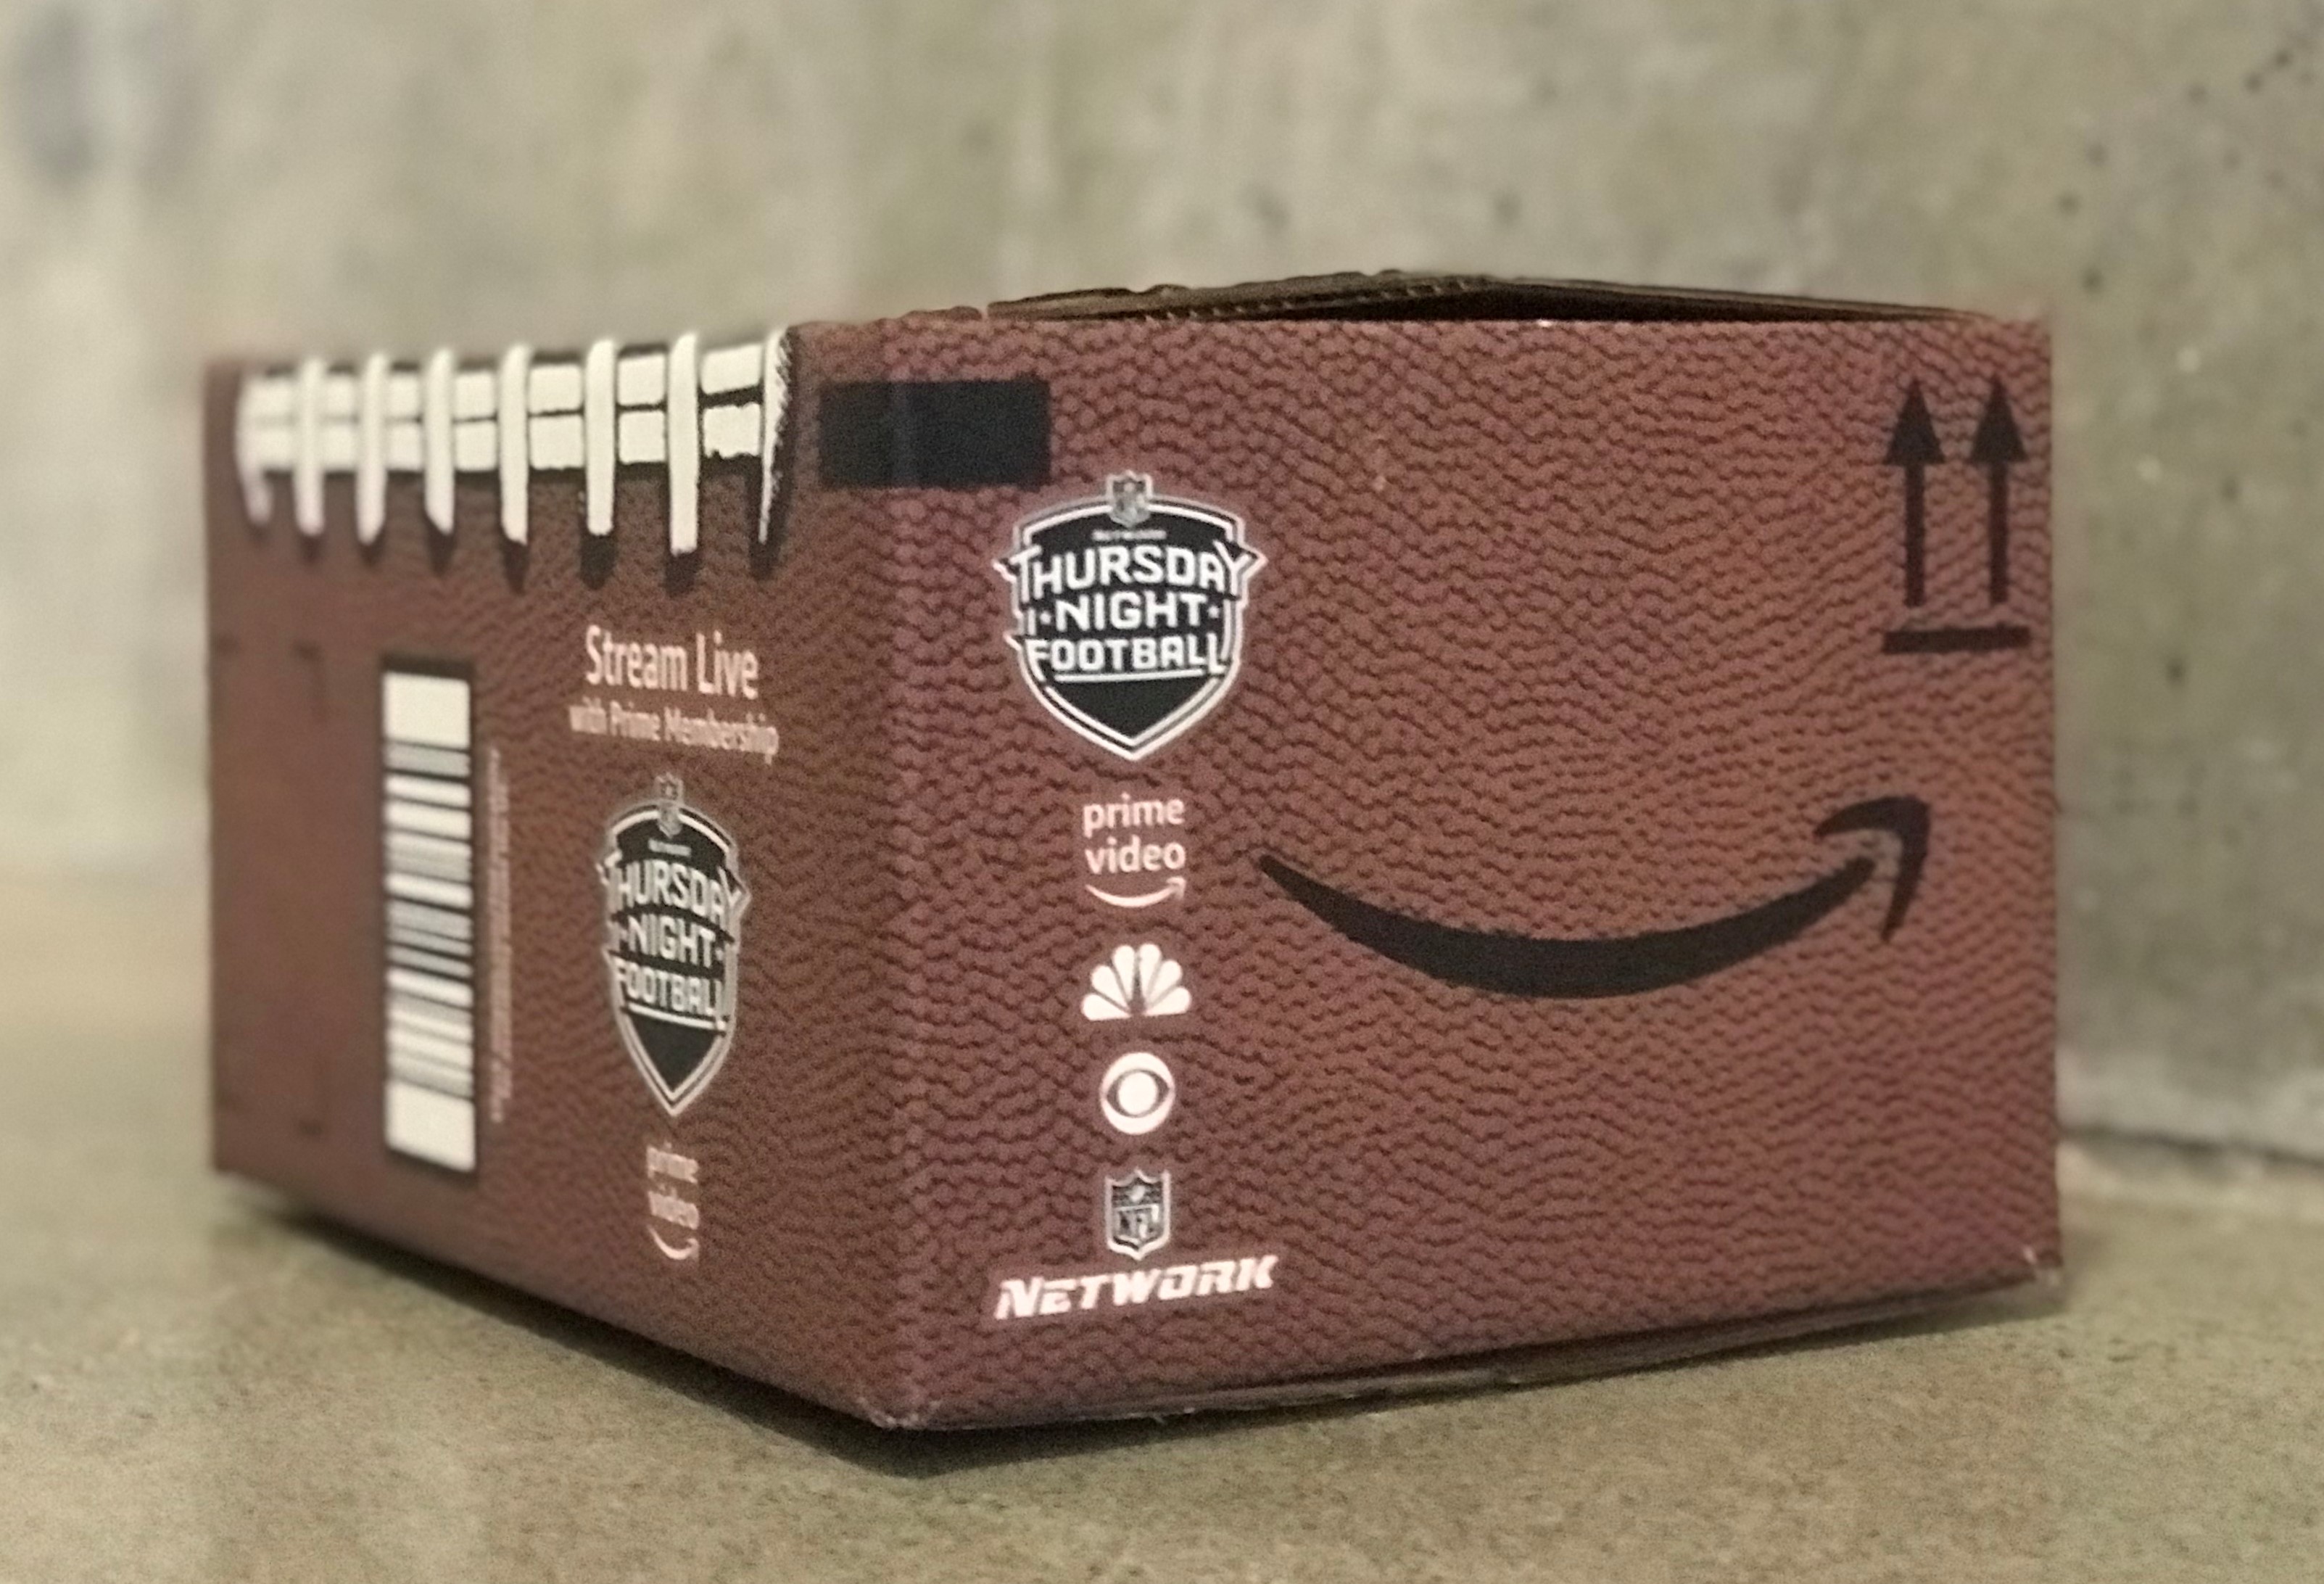 Amazon Makes Its Highly Anticipated Thursday Night Football Debut